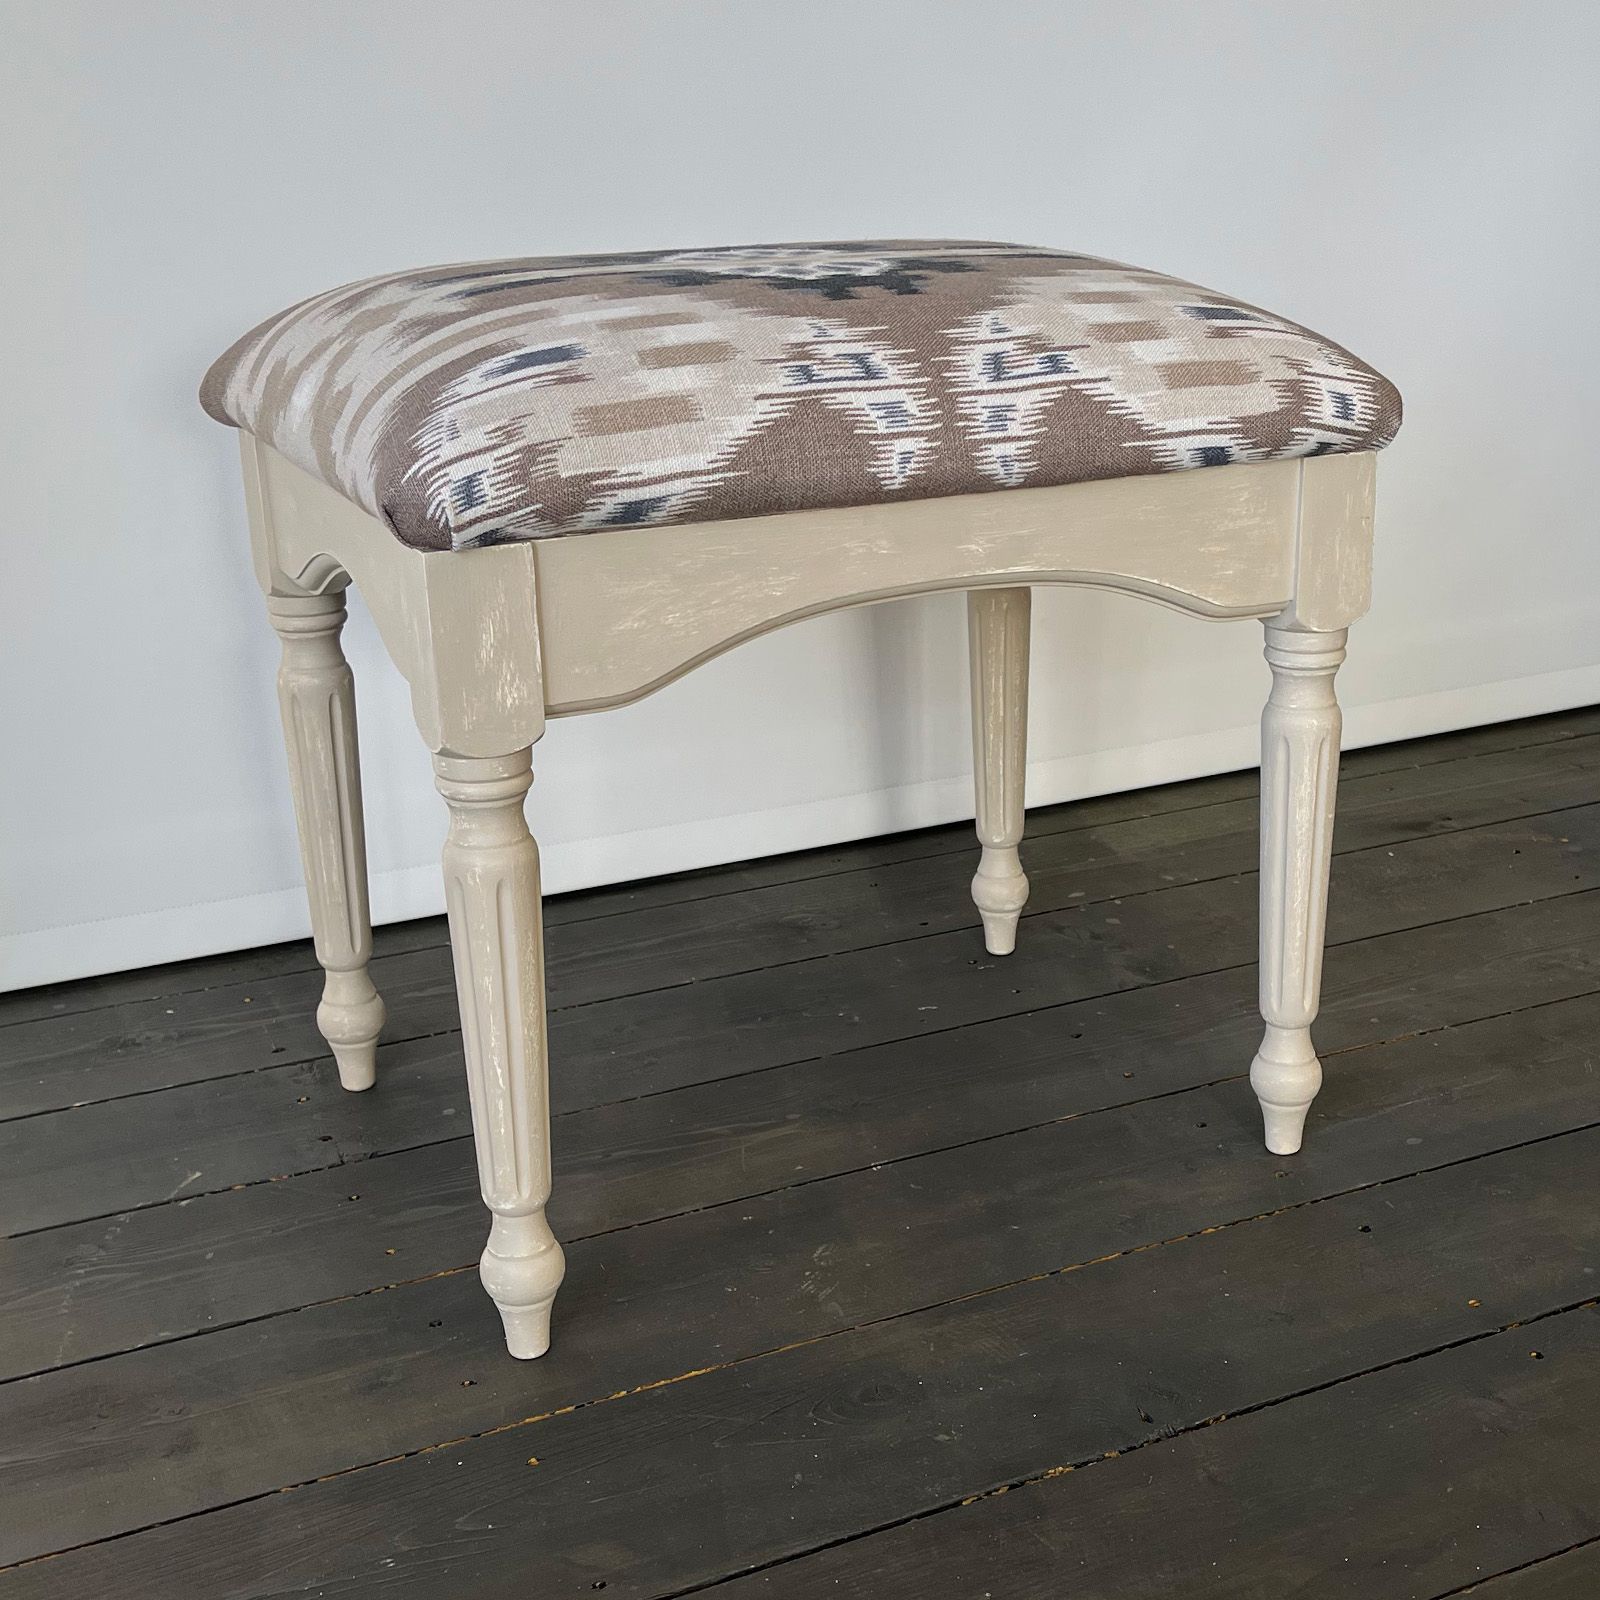 Repro dark wood stool upcycled into royal circus beige.